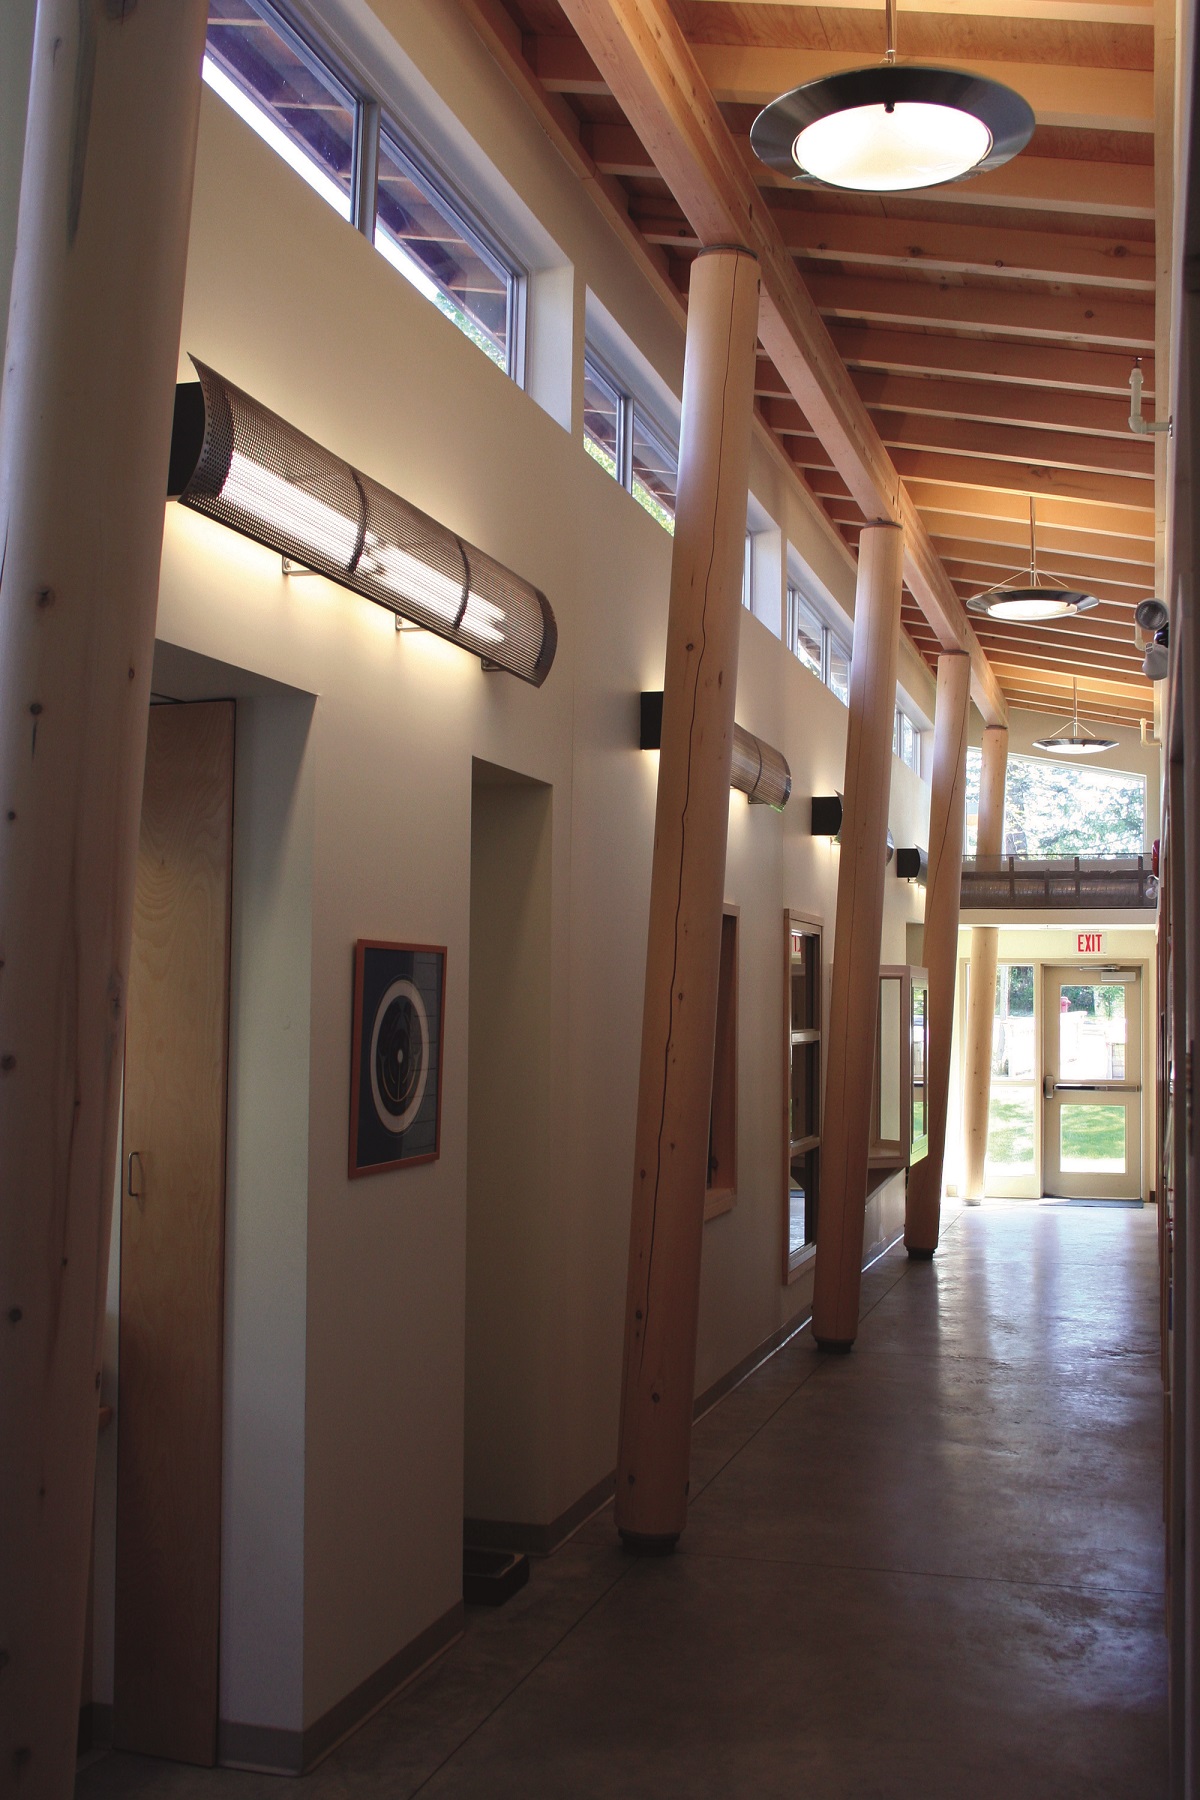 solid-sawn heavy timber pole columns, beams, and roof trusses topped with plywood sheathing are shown in this interior hallway view of the Takamine Community Health Services building